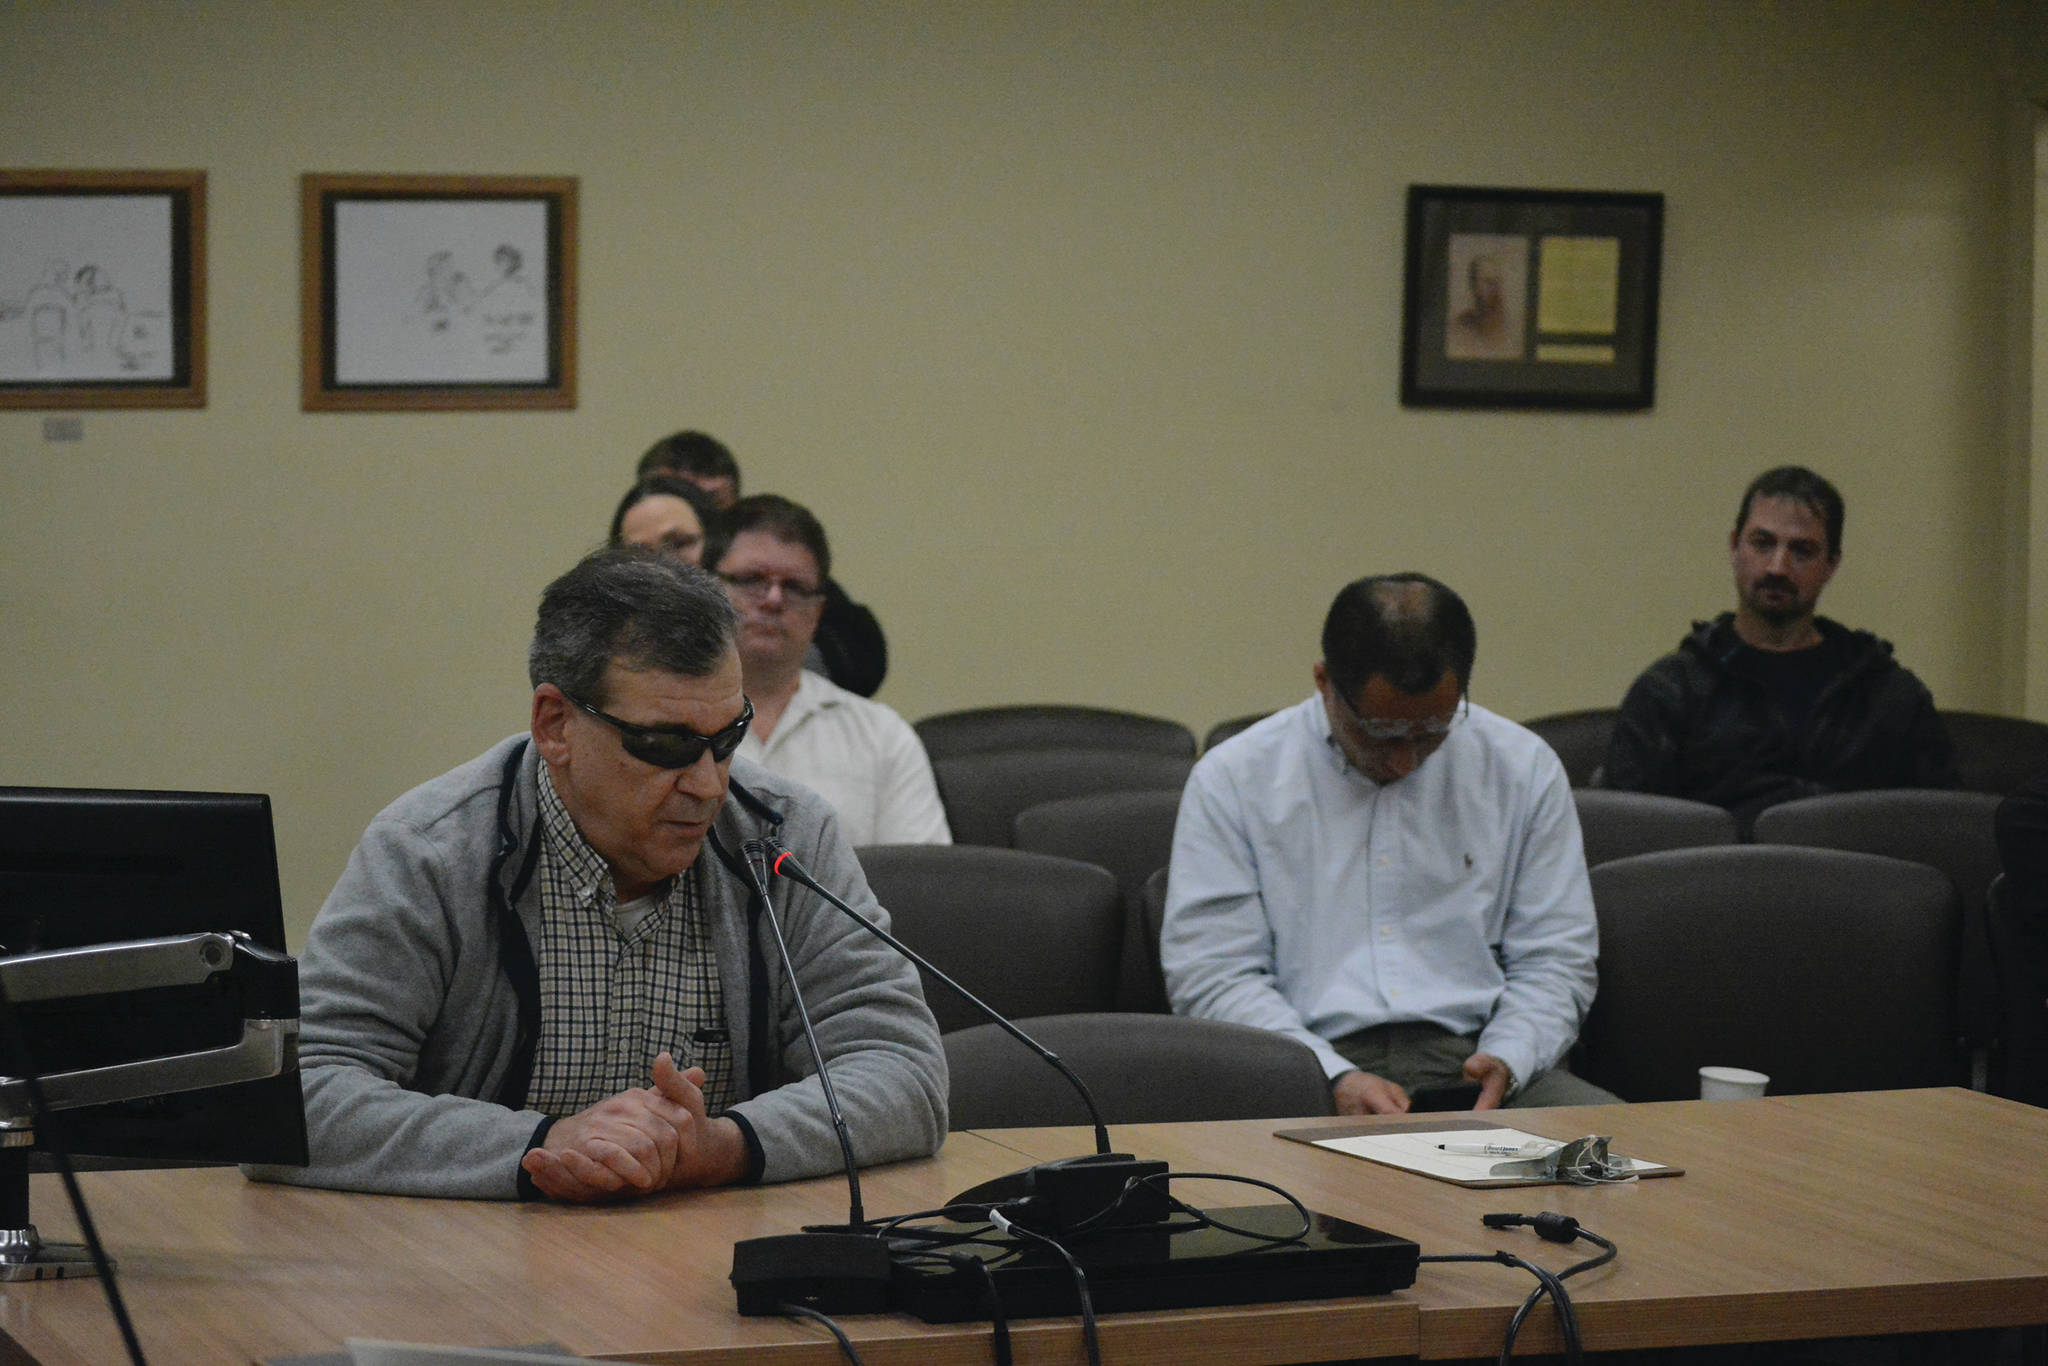 Rick Malley speaks to the Homer City Council on Nov. 23, 2015, in Homer, Alaska. Malley filed a complaint with the Alaska Human Rights Commission charging that the Kenai Peninsula Borough discriminated against him on the basis of a physical disability by not providing use of ADA compliant voting equipment at a borough election. (Photo by Michael Armstrong/Homer News)